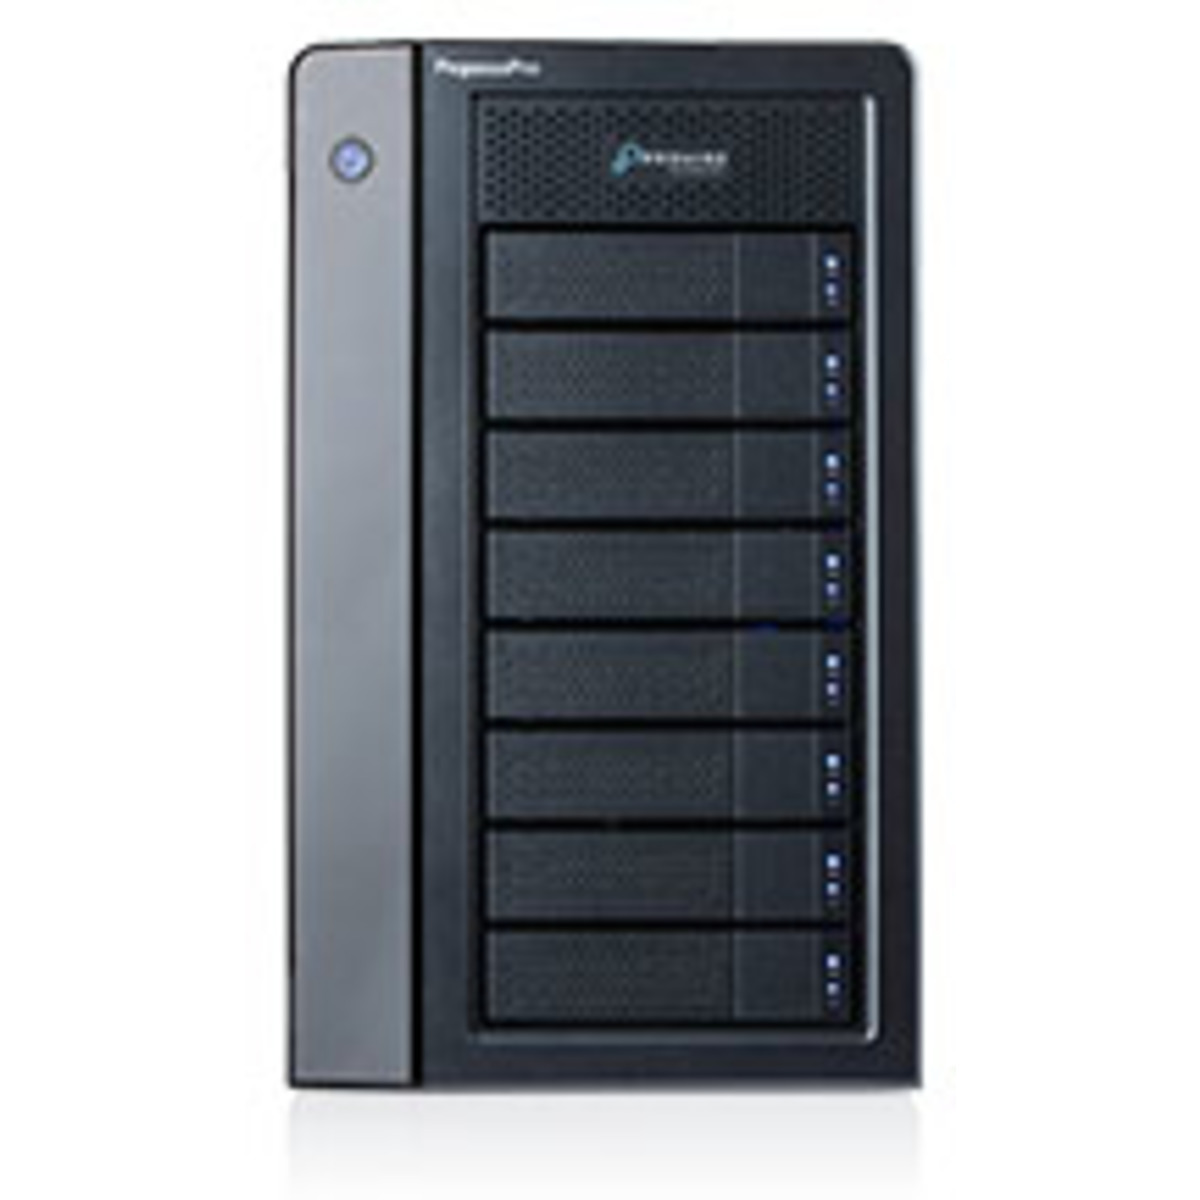 buy $8084 Promise Technology PegasusPro R8 64tb Desktop DAS-NAS - Combo Direct + Network Storage Device 8x8000gb Western Digital Ultrastar DC HC320 HUS728T8TALE6L4 3.5 7200rpm SATA 6Gb/s HDD ENTERPRISE Class Drives Installed - Burn-In Tested - nas headquarters buy network attached storage server device das new raid-5 free shipping usa christmas new year holiday sale PegasusPro R8